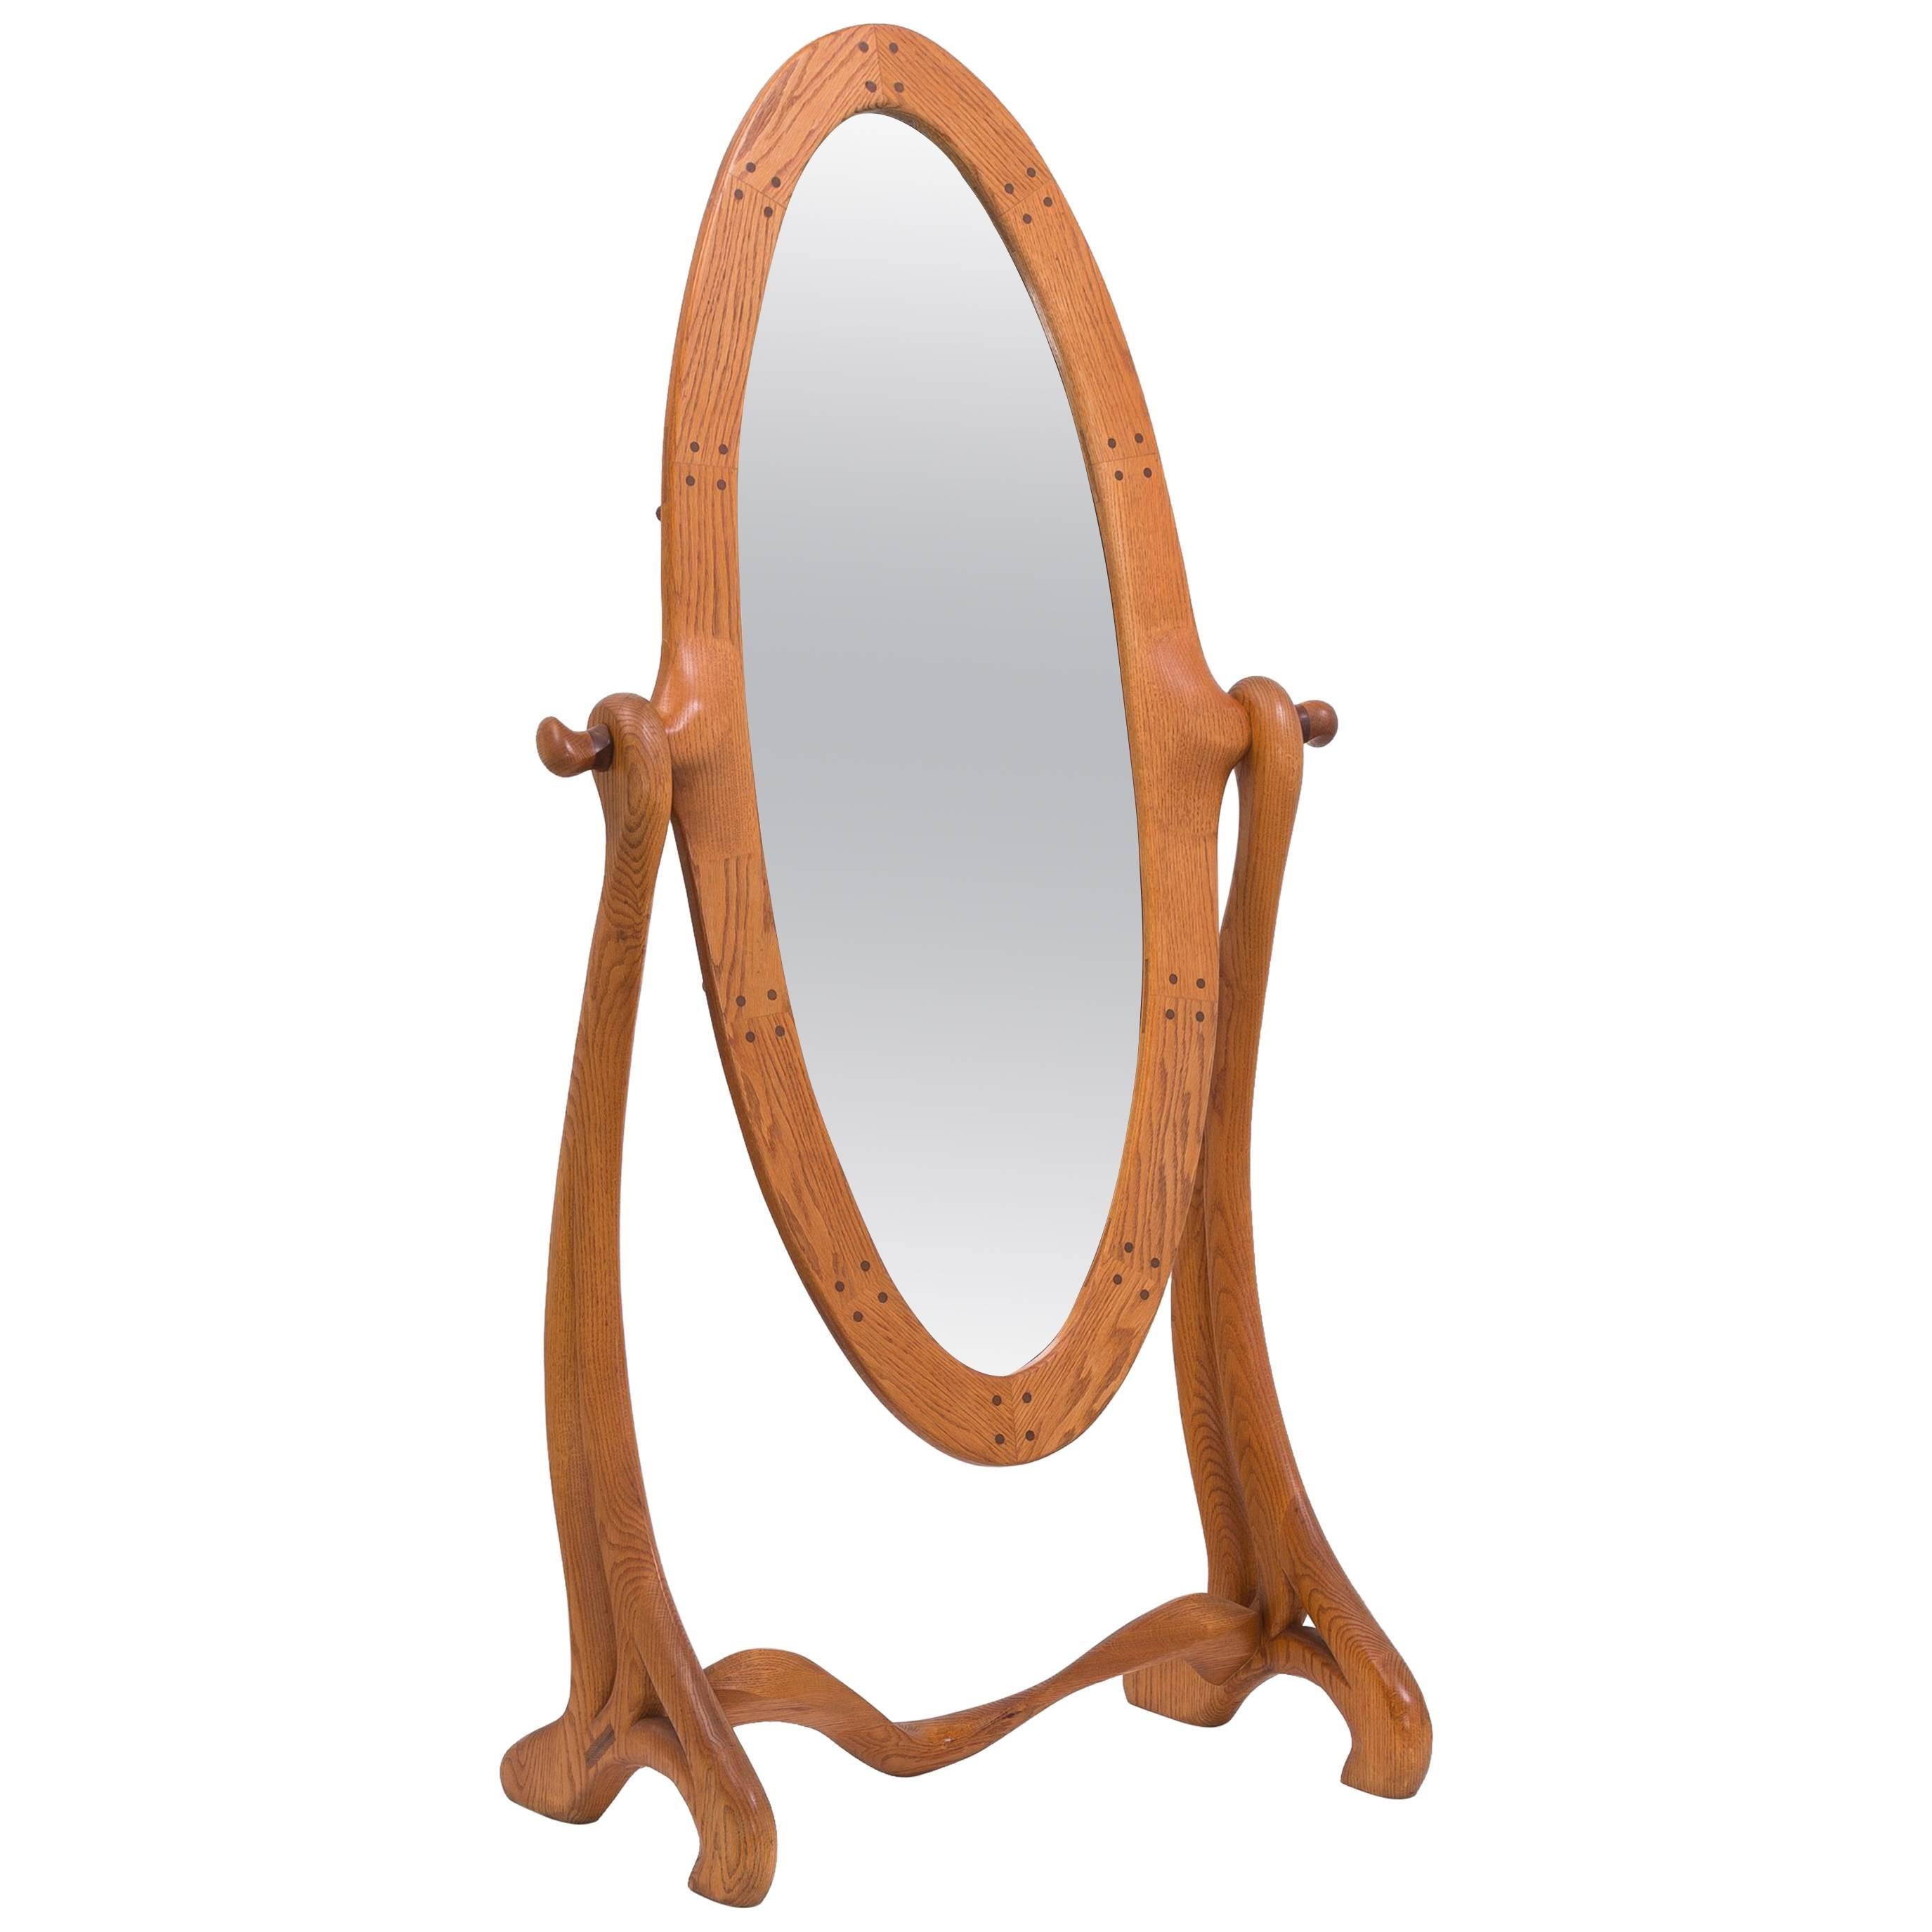 Sculptural Maple Wood Framed Cheval Mirror, USA, 1950s For Sale